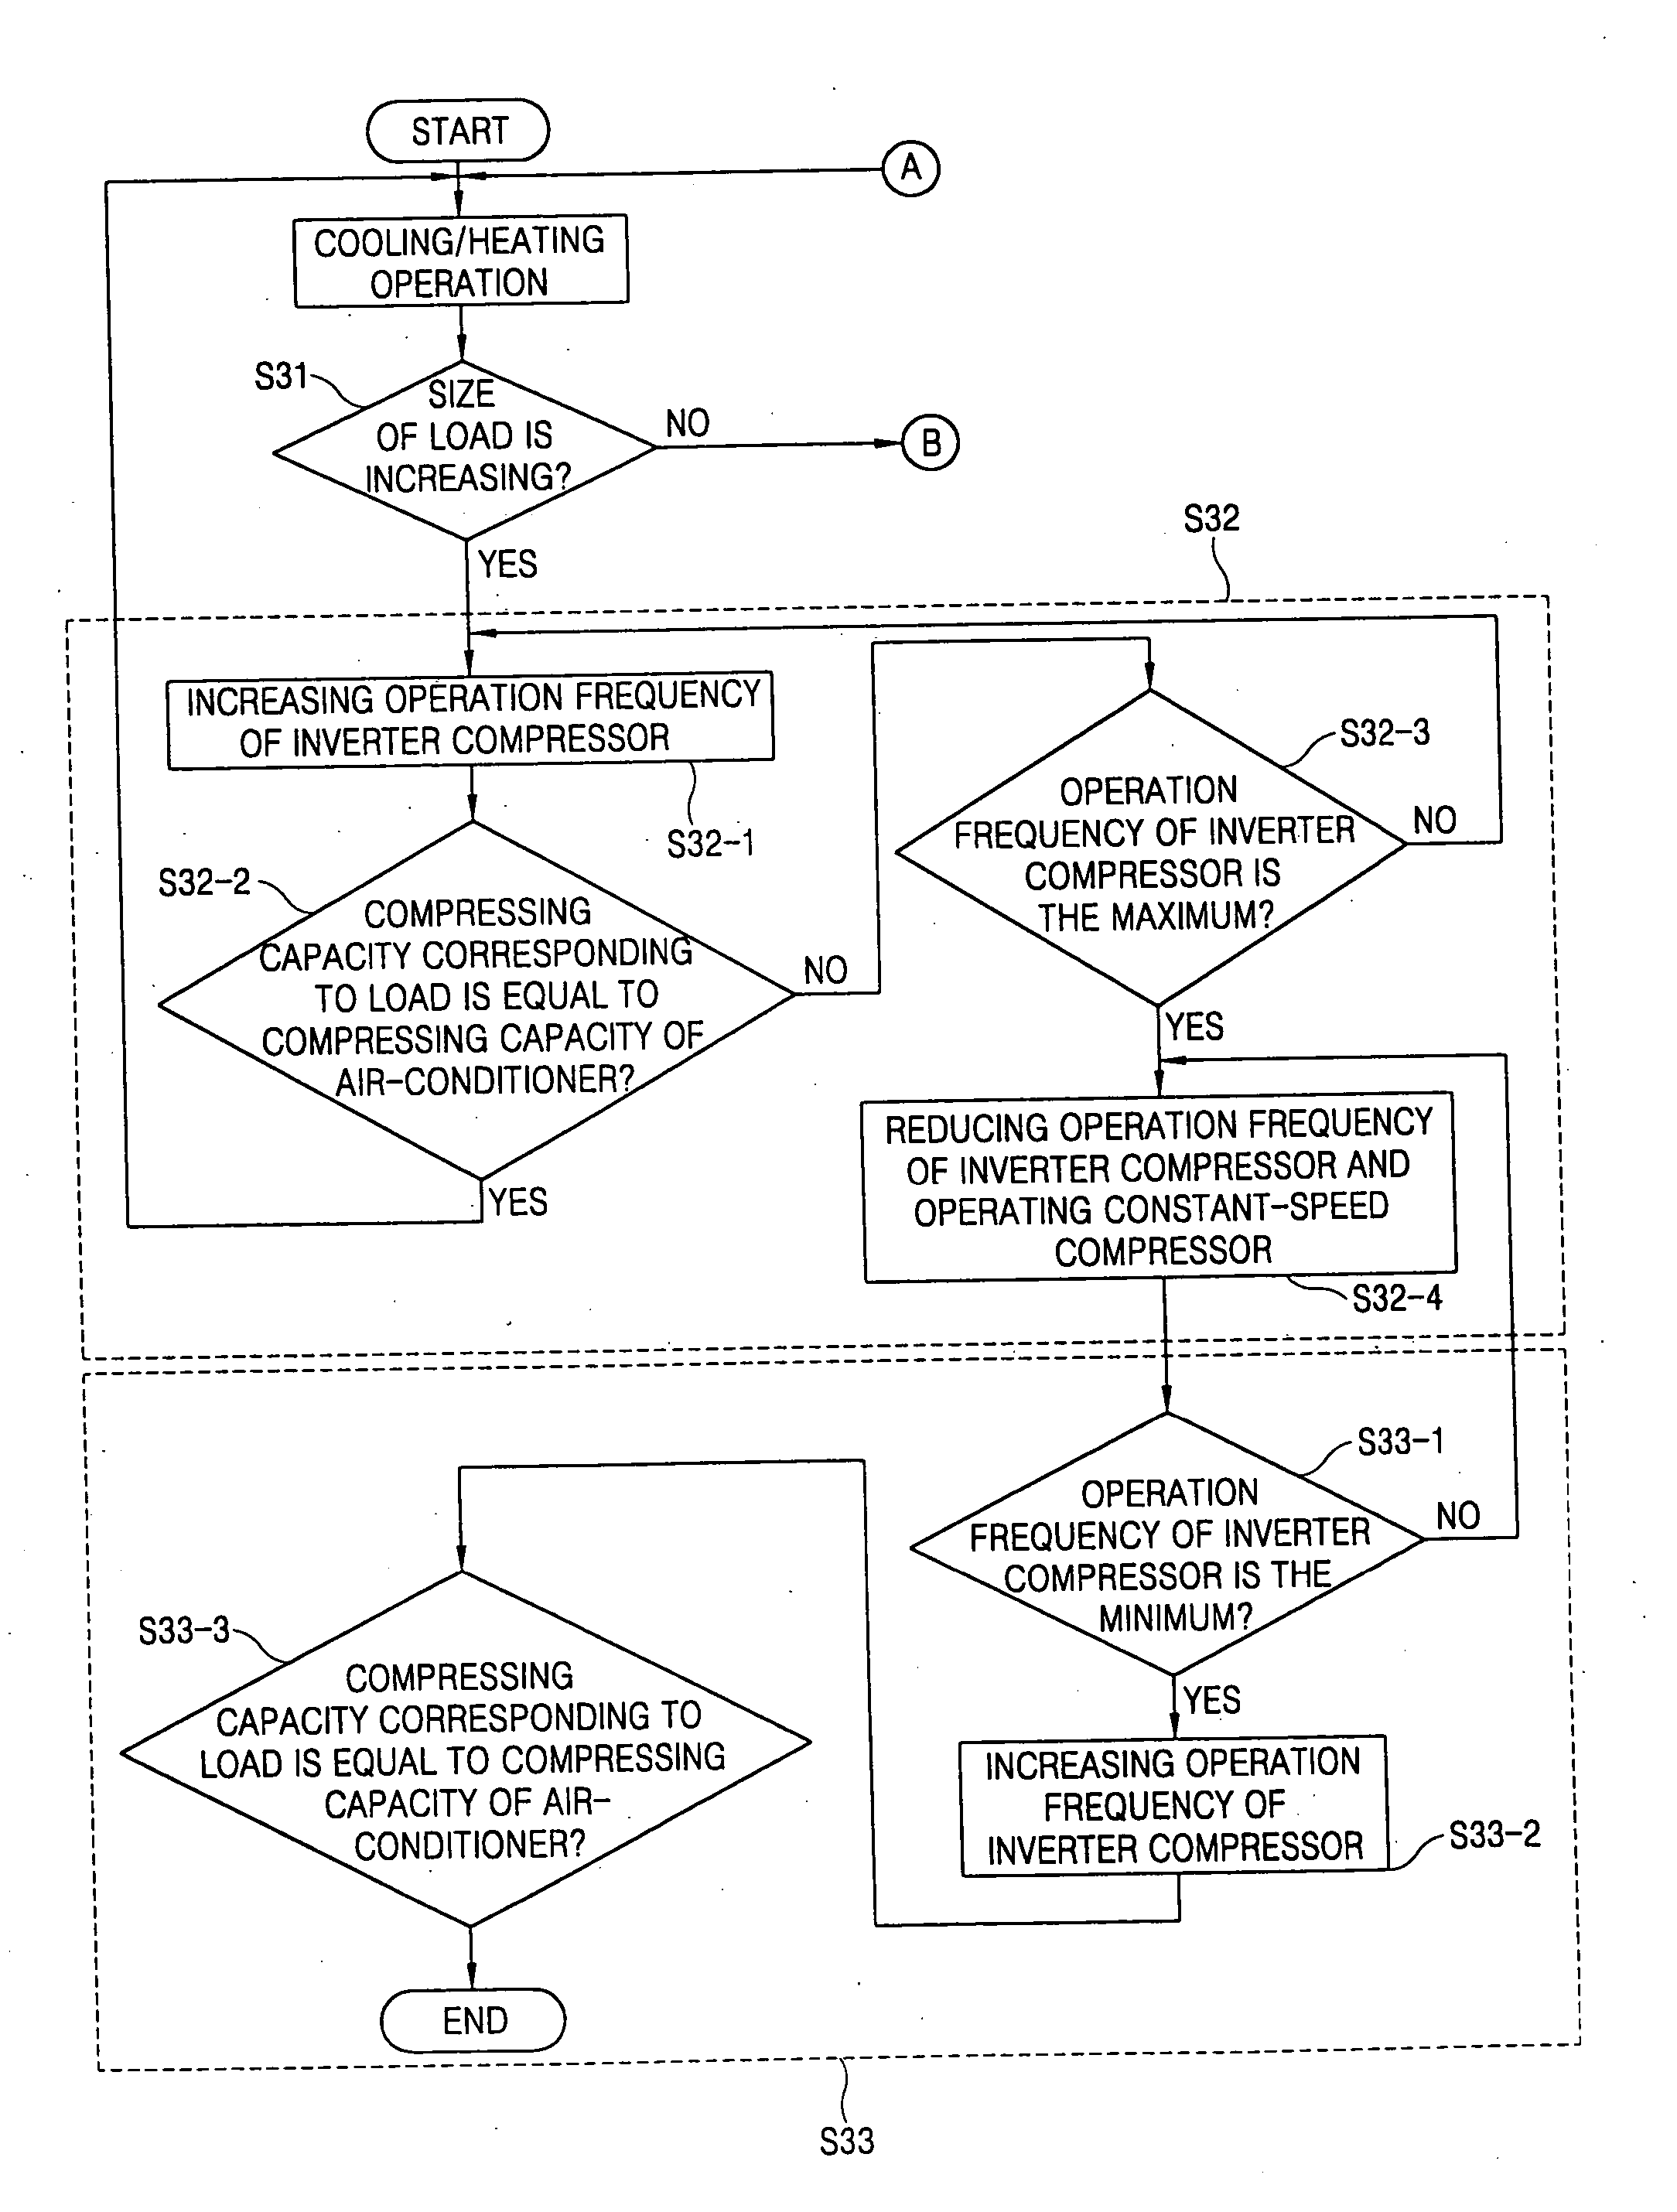 Method for controlling operation of air-conditioner